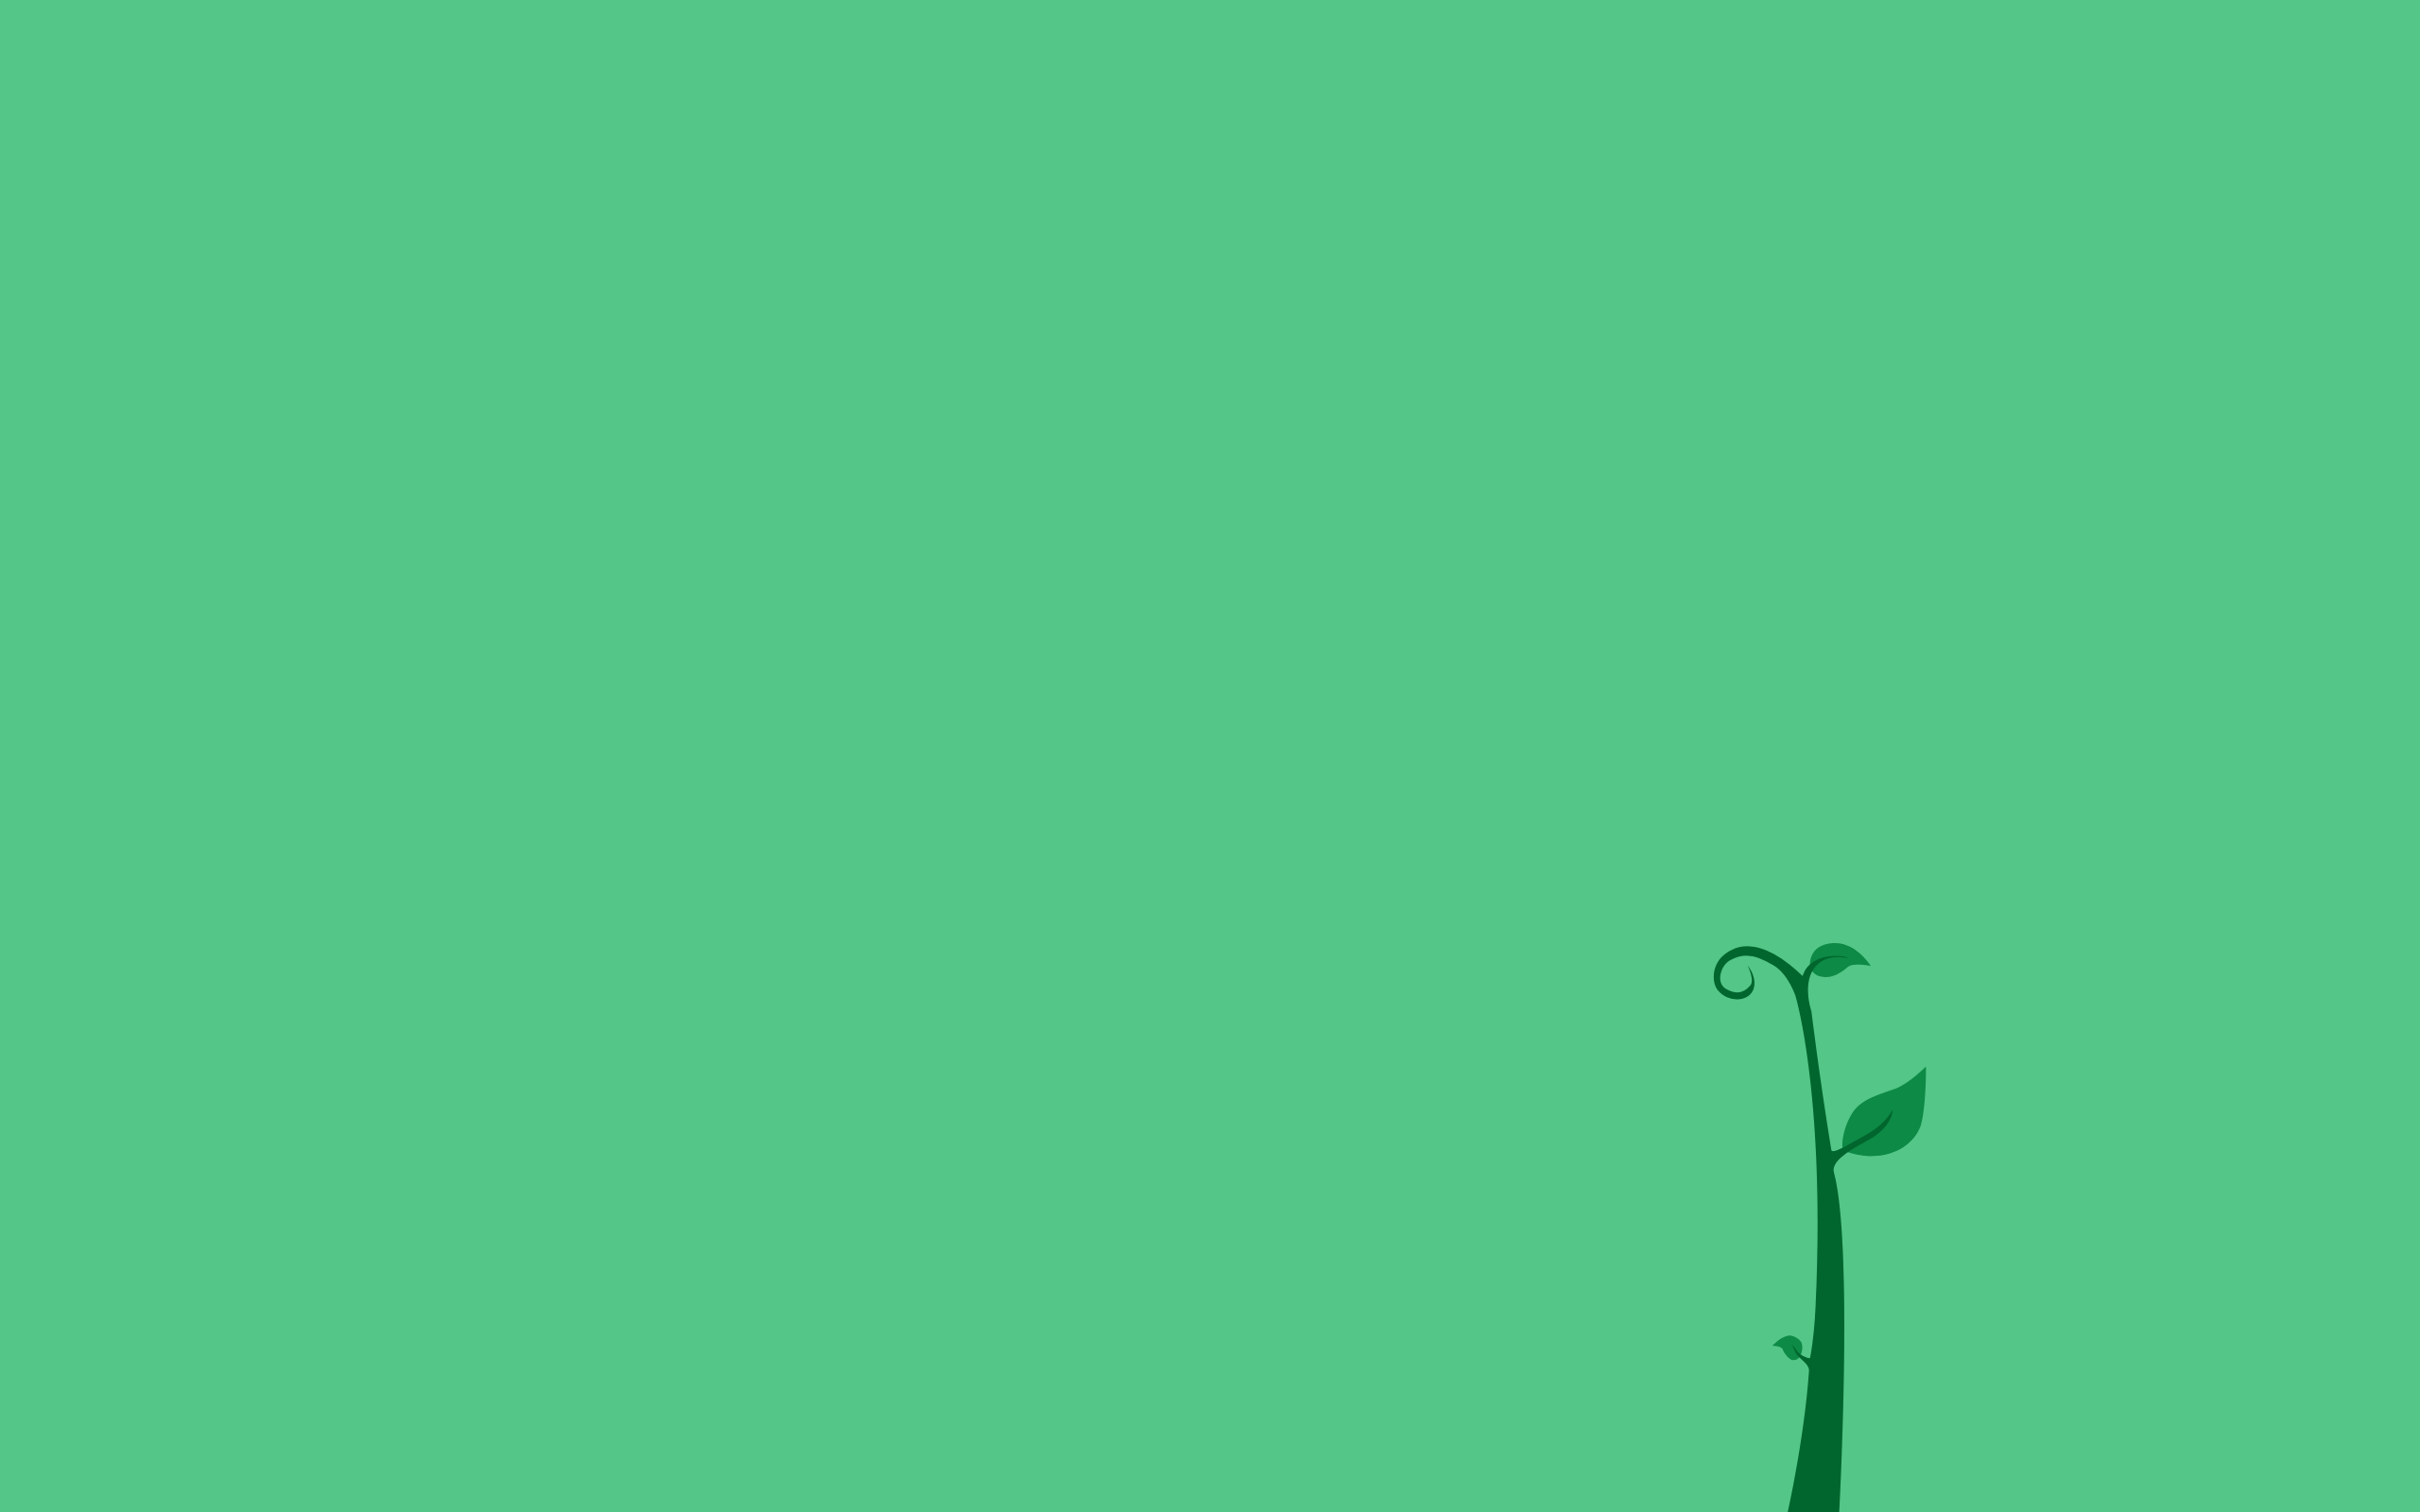 simple green backgrounds